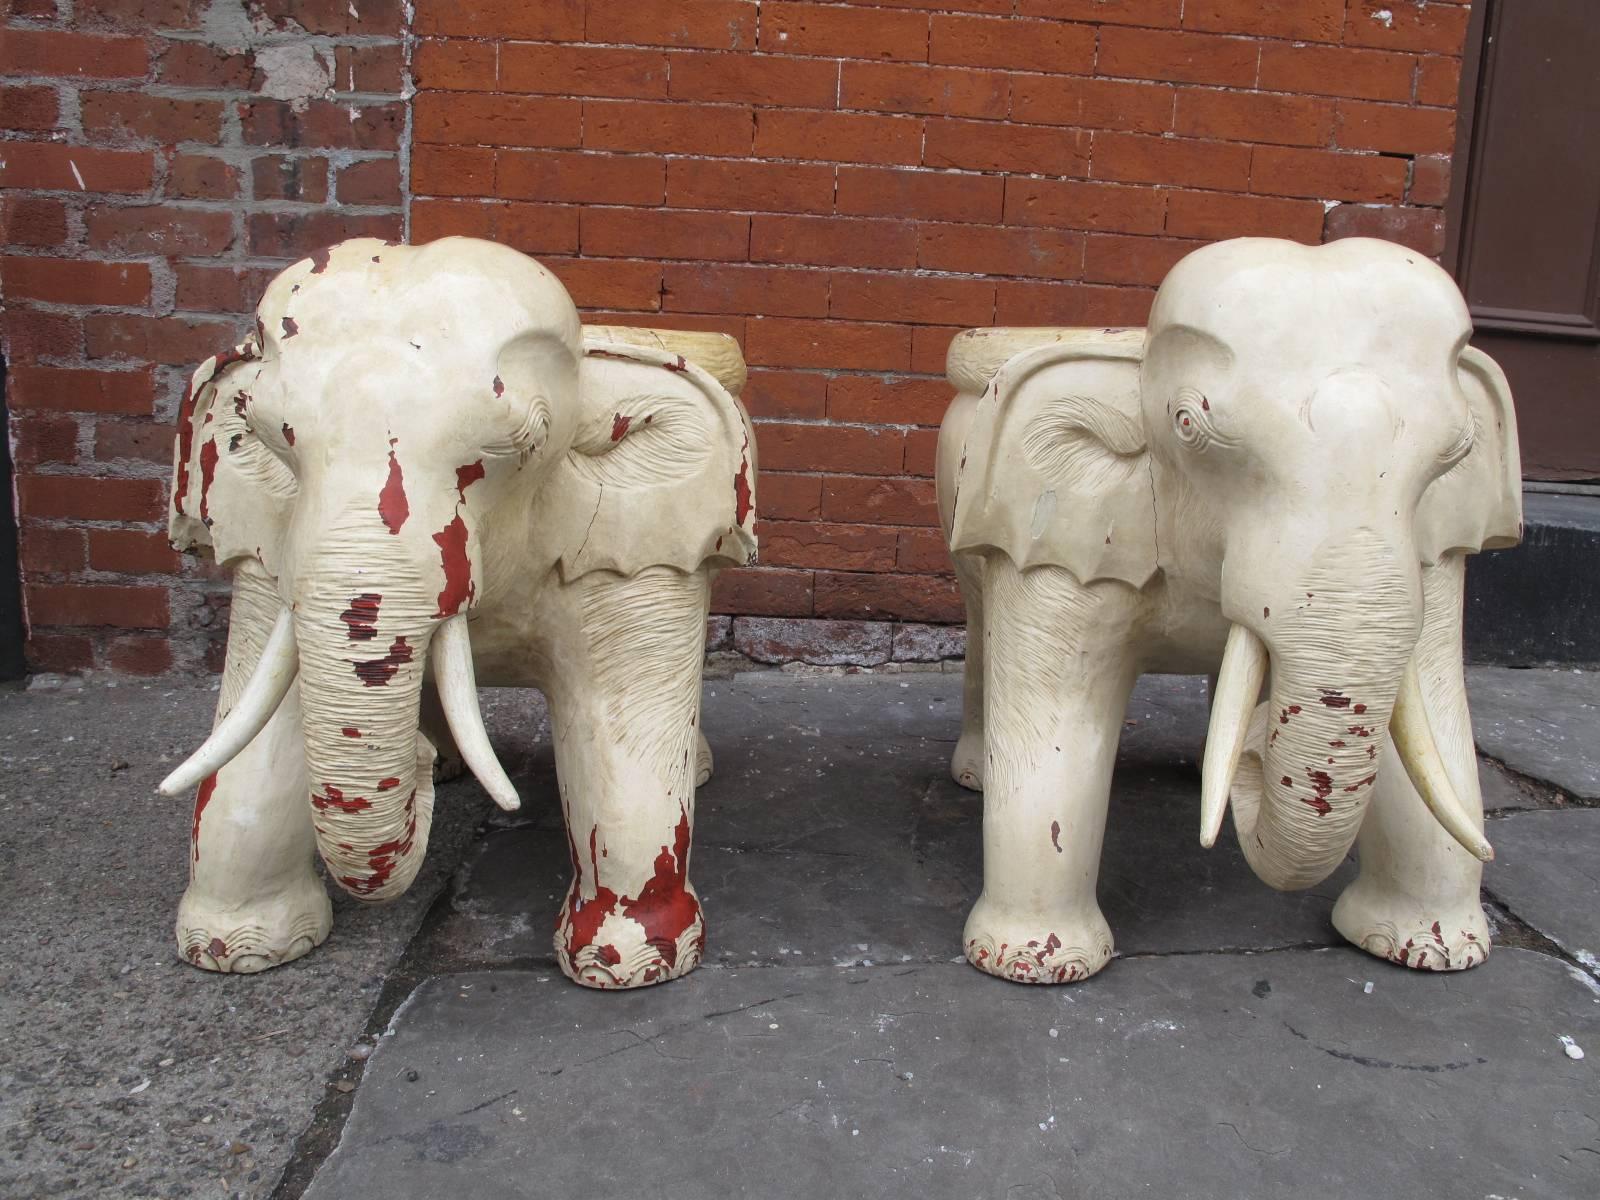 Two garden stools or side tables. Smiling elephants with wood tusks.